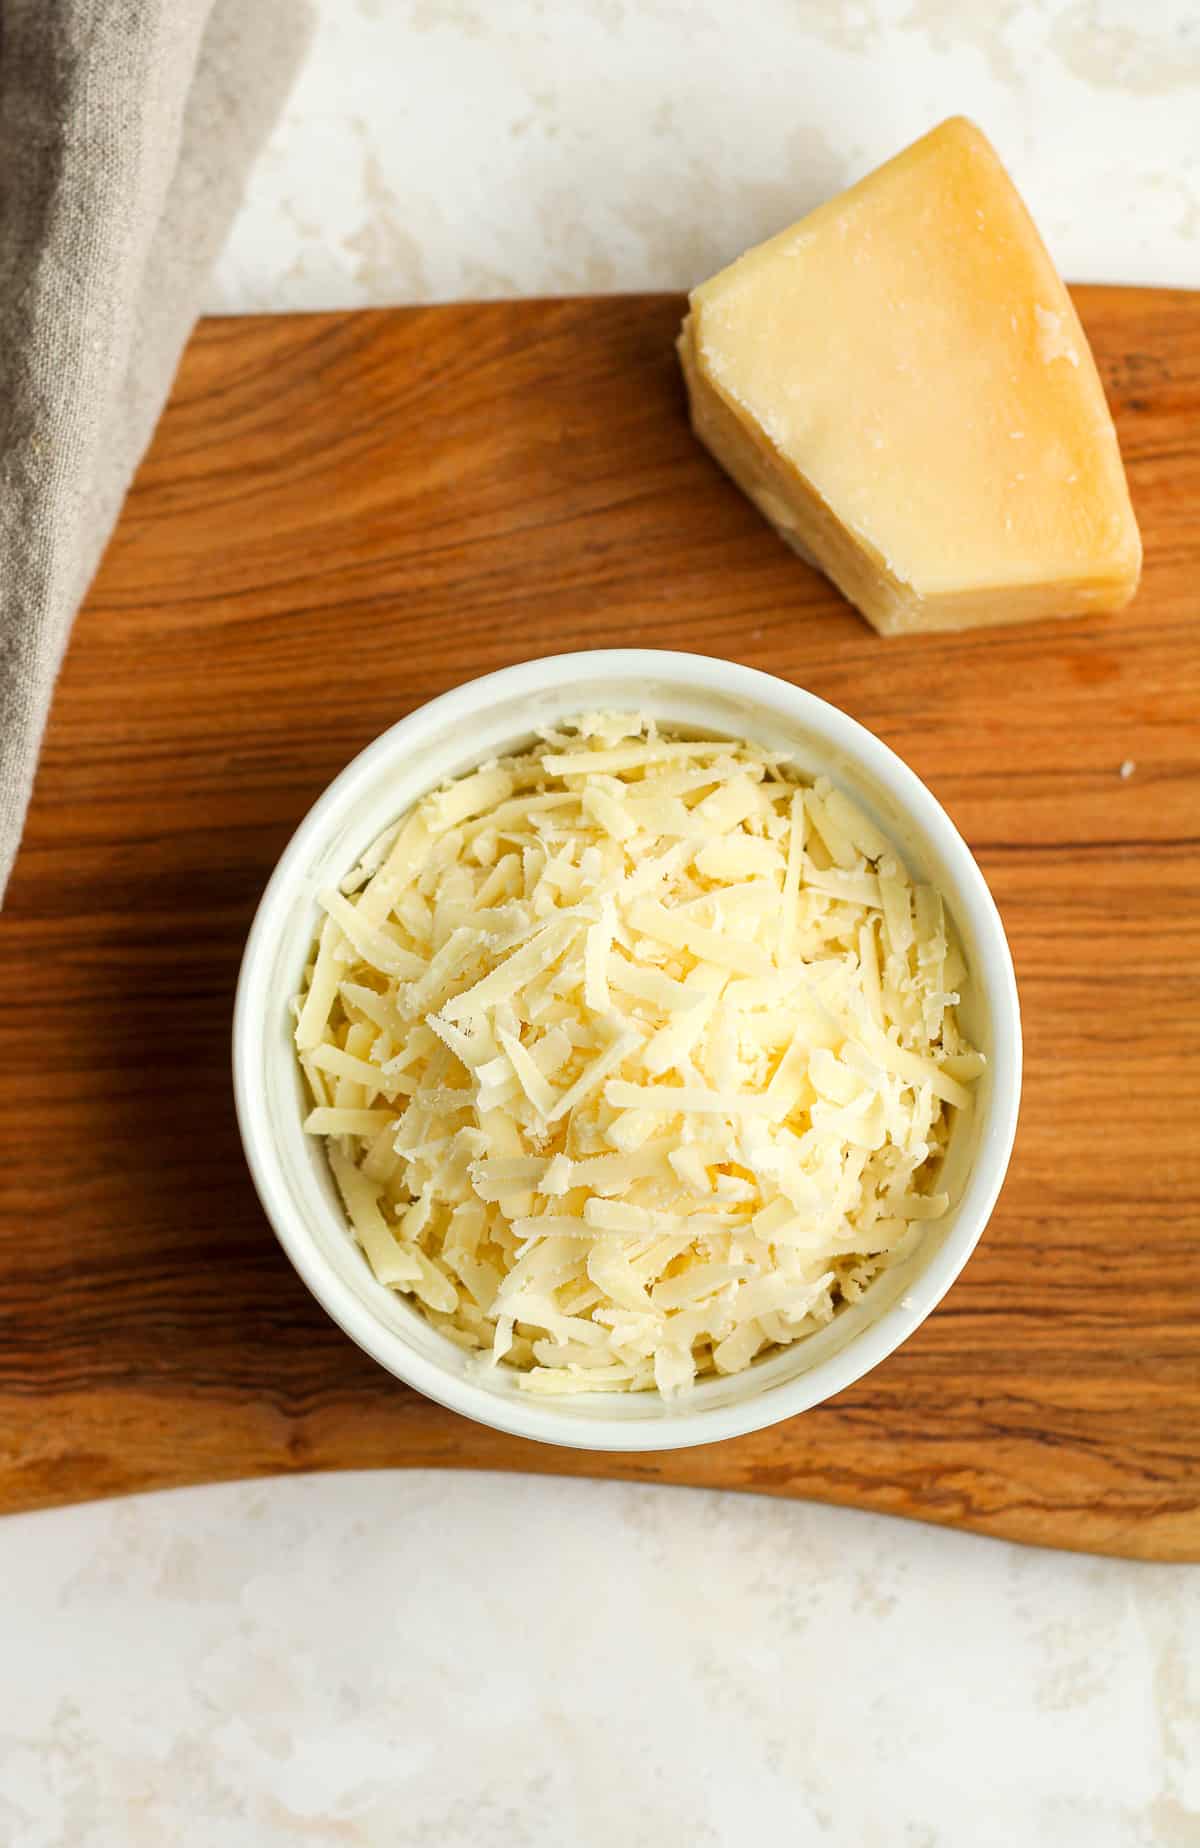 A bowl of shredded parmesan cheese, with a partial chunk next to it.